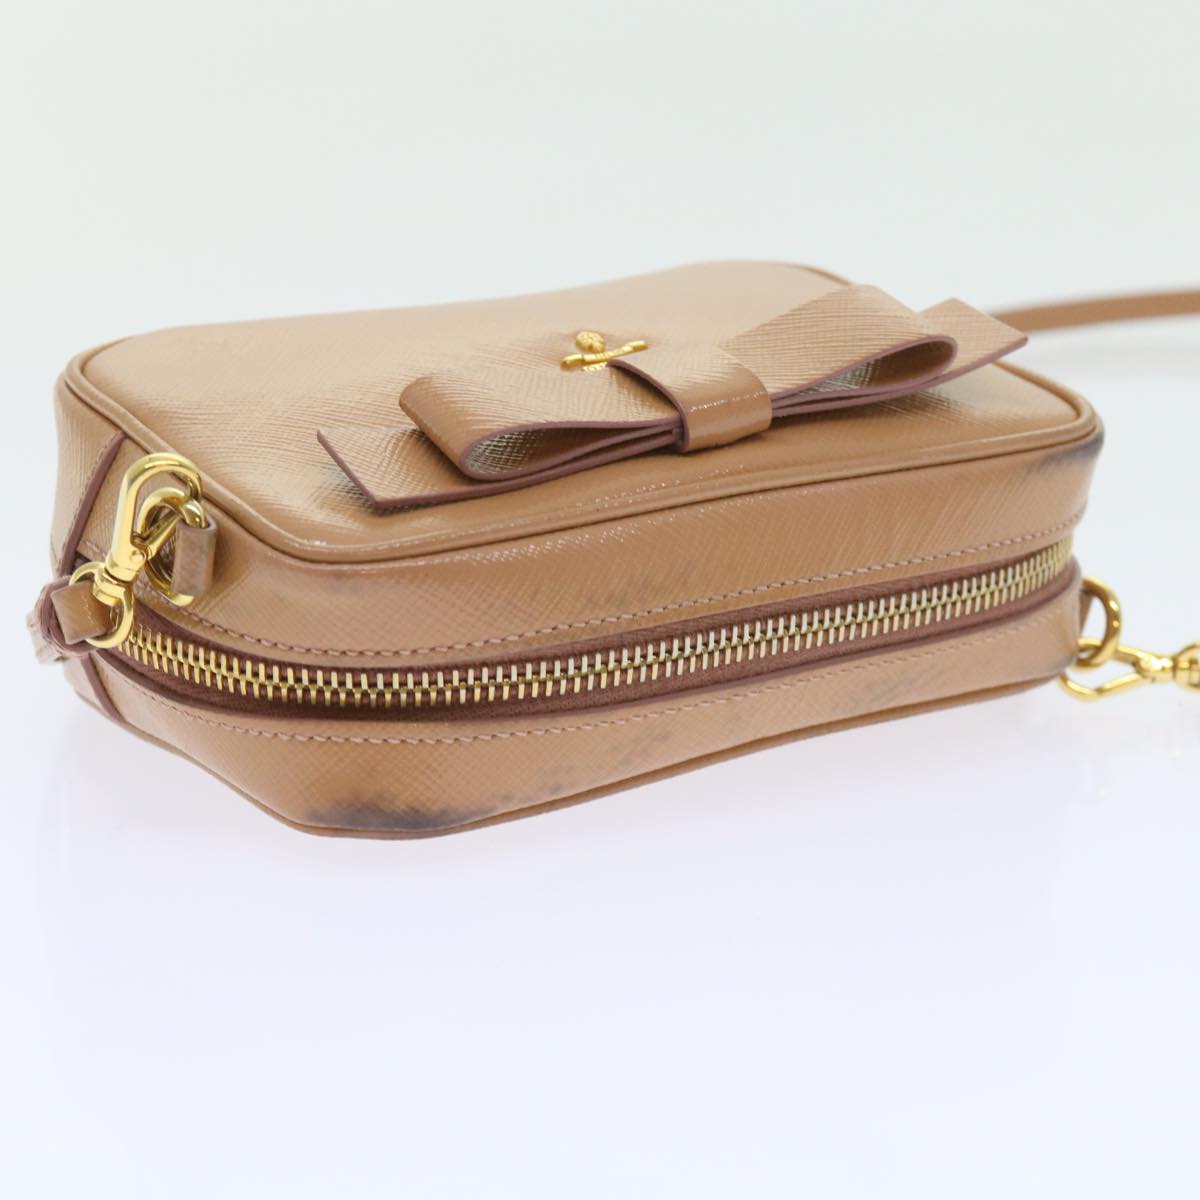 PRADA Shoulder Pouch Safiano leather Beige Auth bs9707